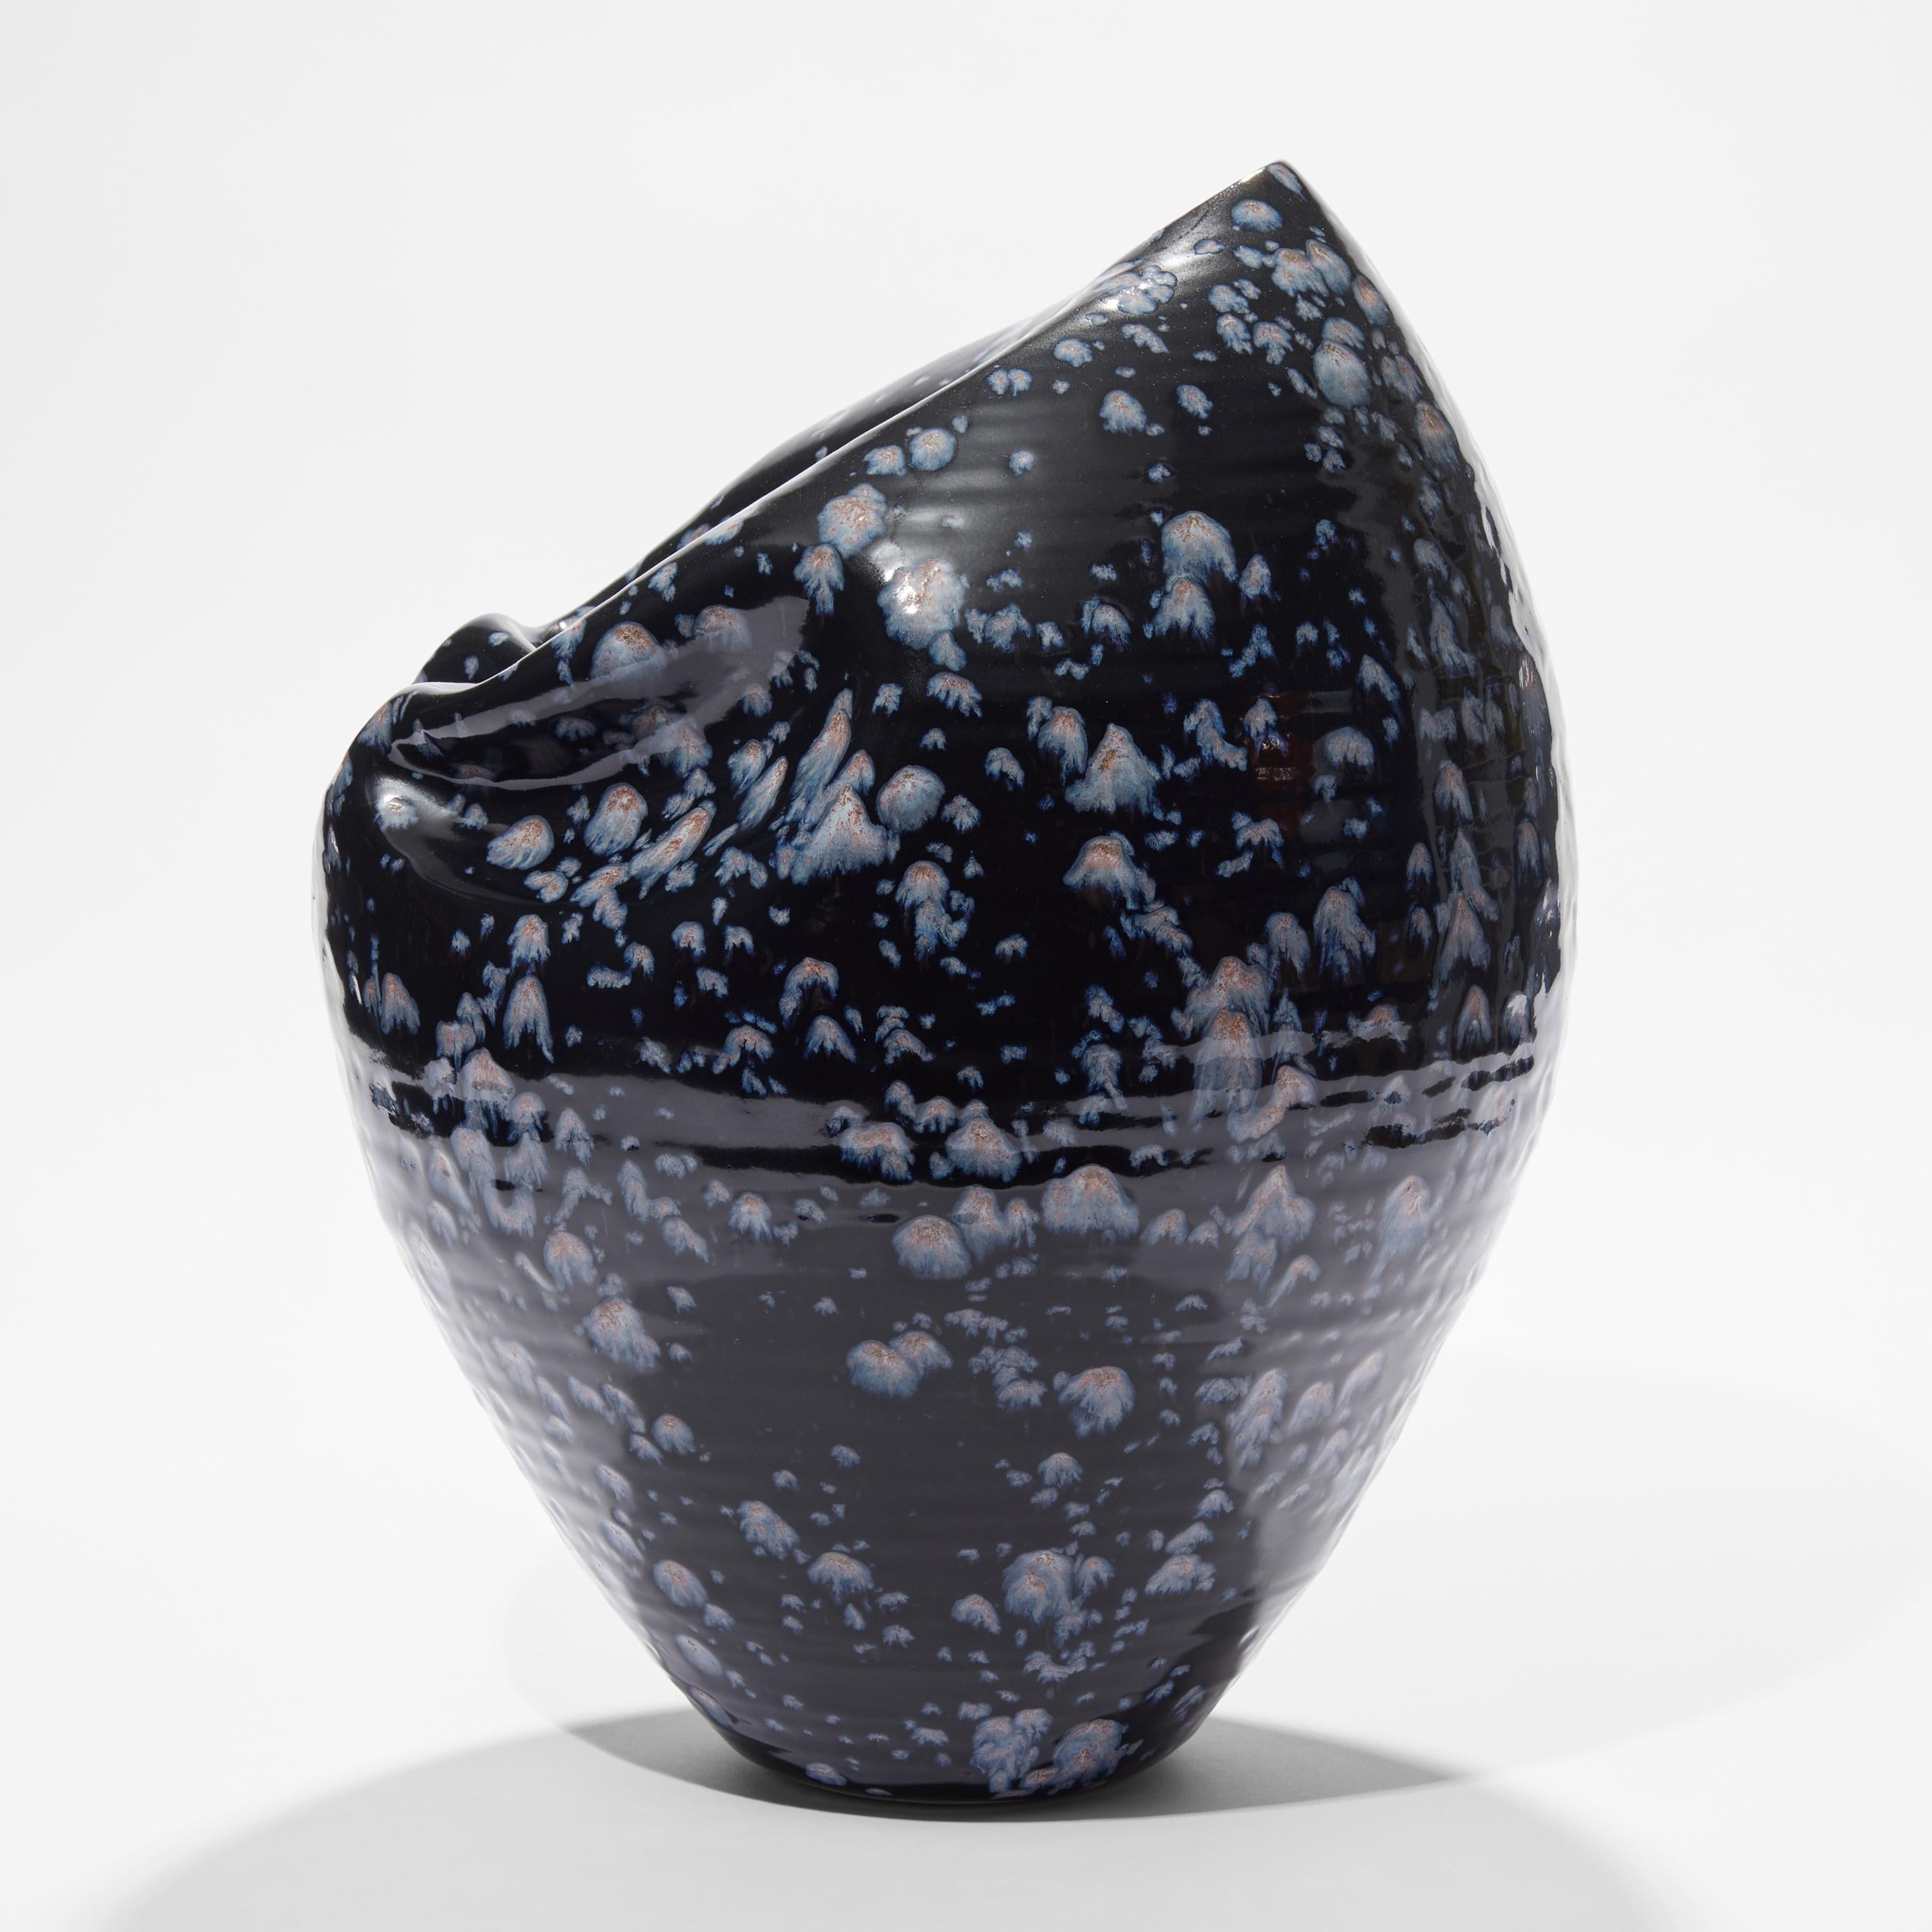 Organic Modern Tall Collapsed Form in Galactic Blue No 92, vessel by Nicholas Arroyave-Portela For Sale